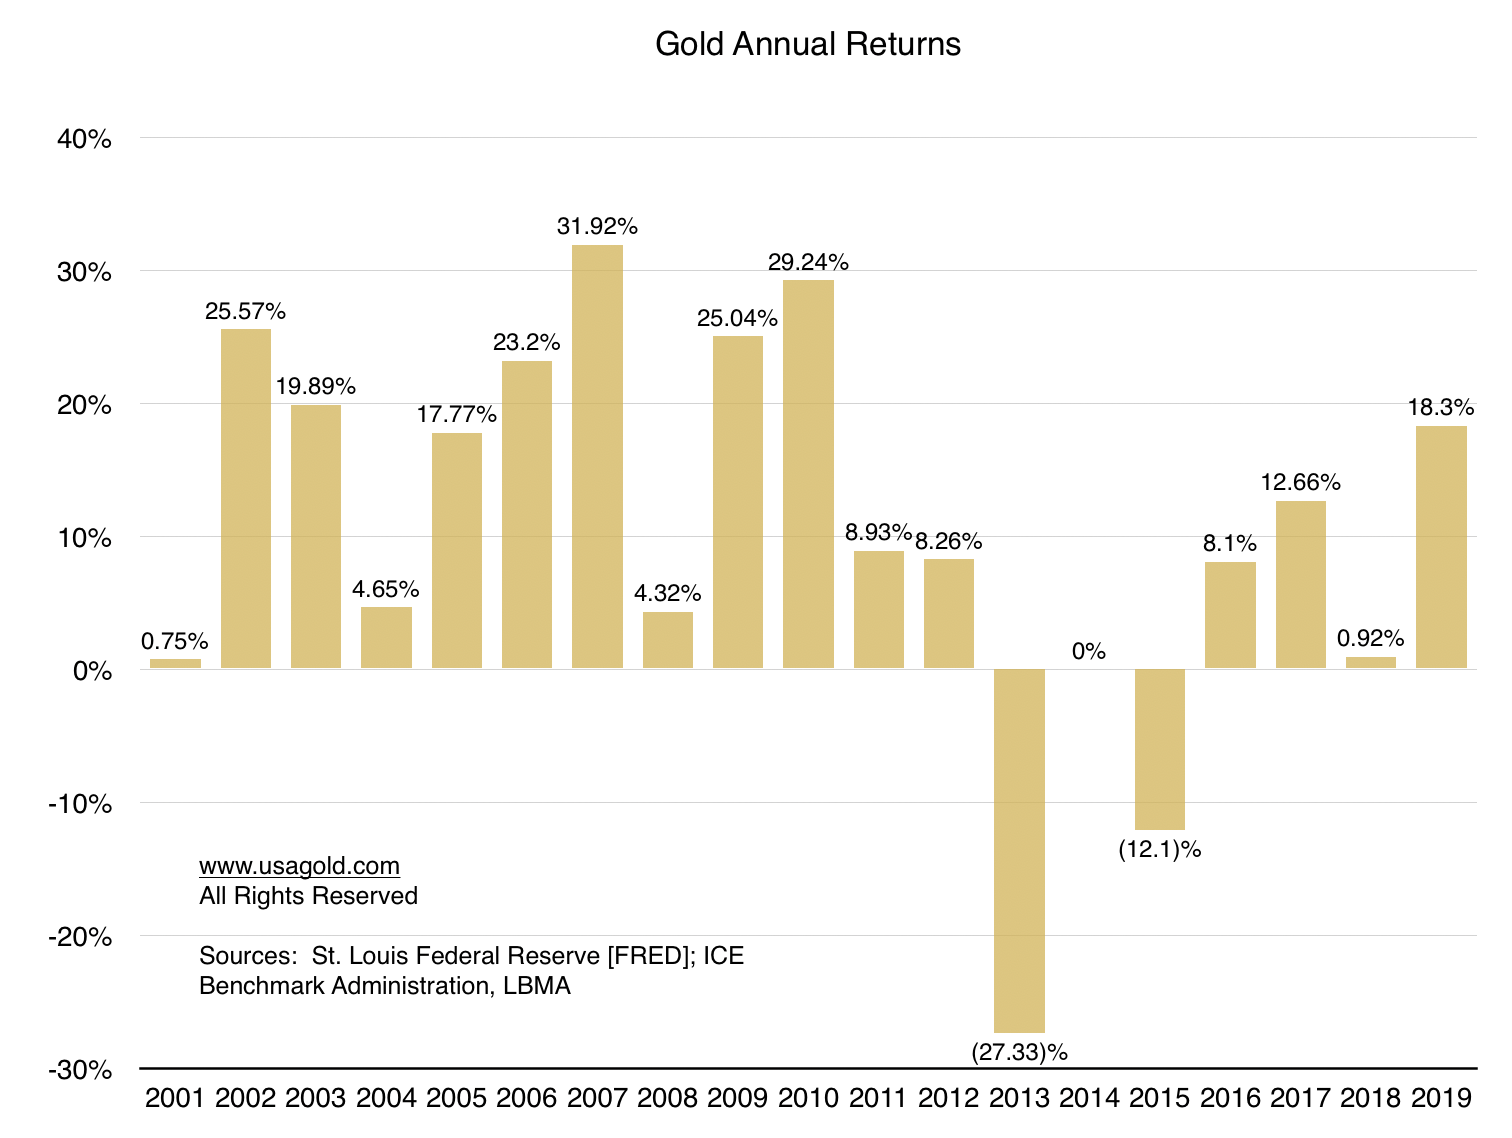 Bar chart showing gold's annual returns since 2000 including year end 2019